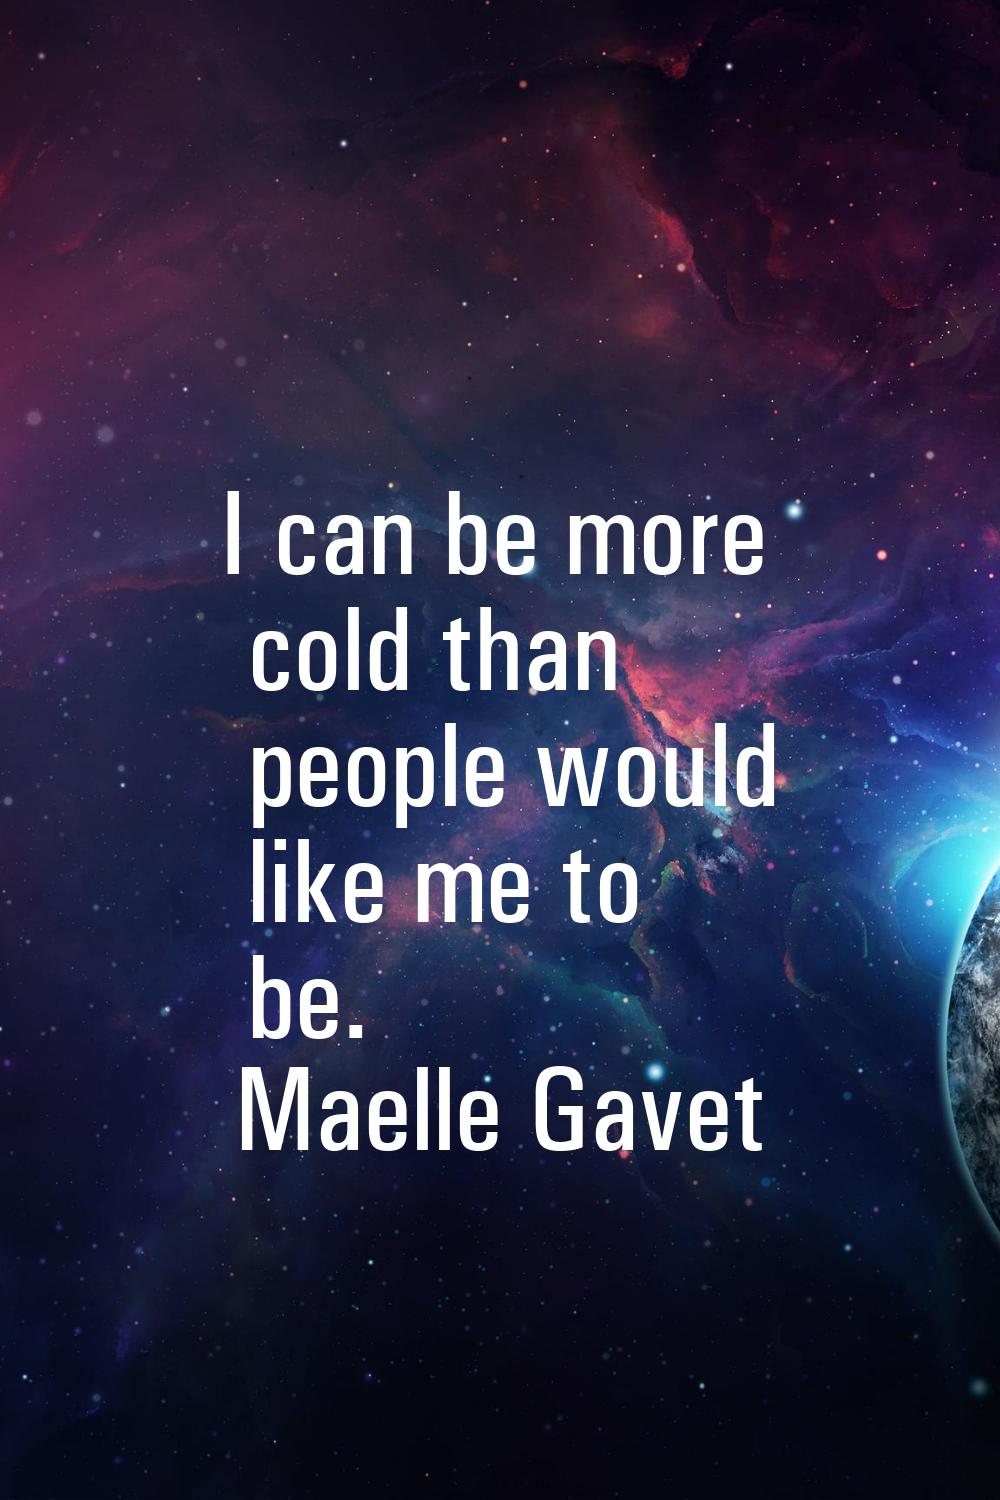 I can be more cold than people would like me to be.